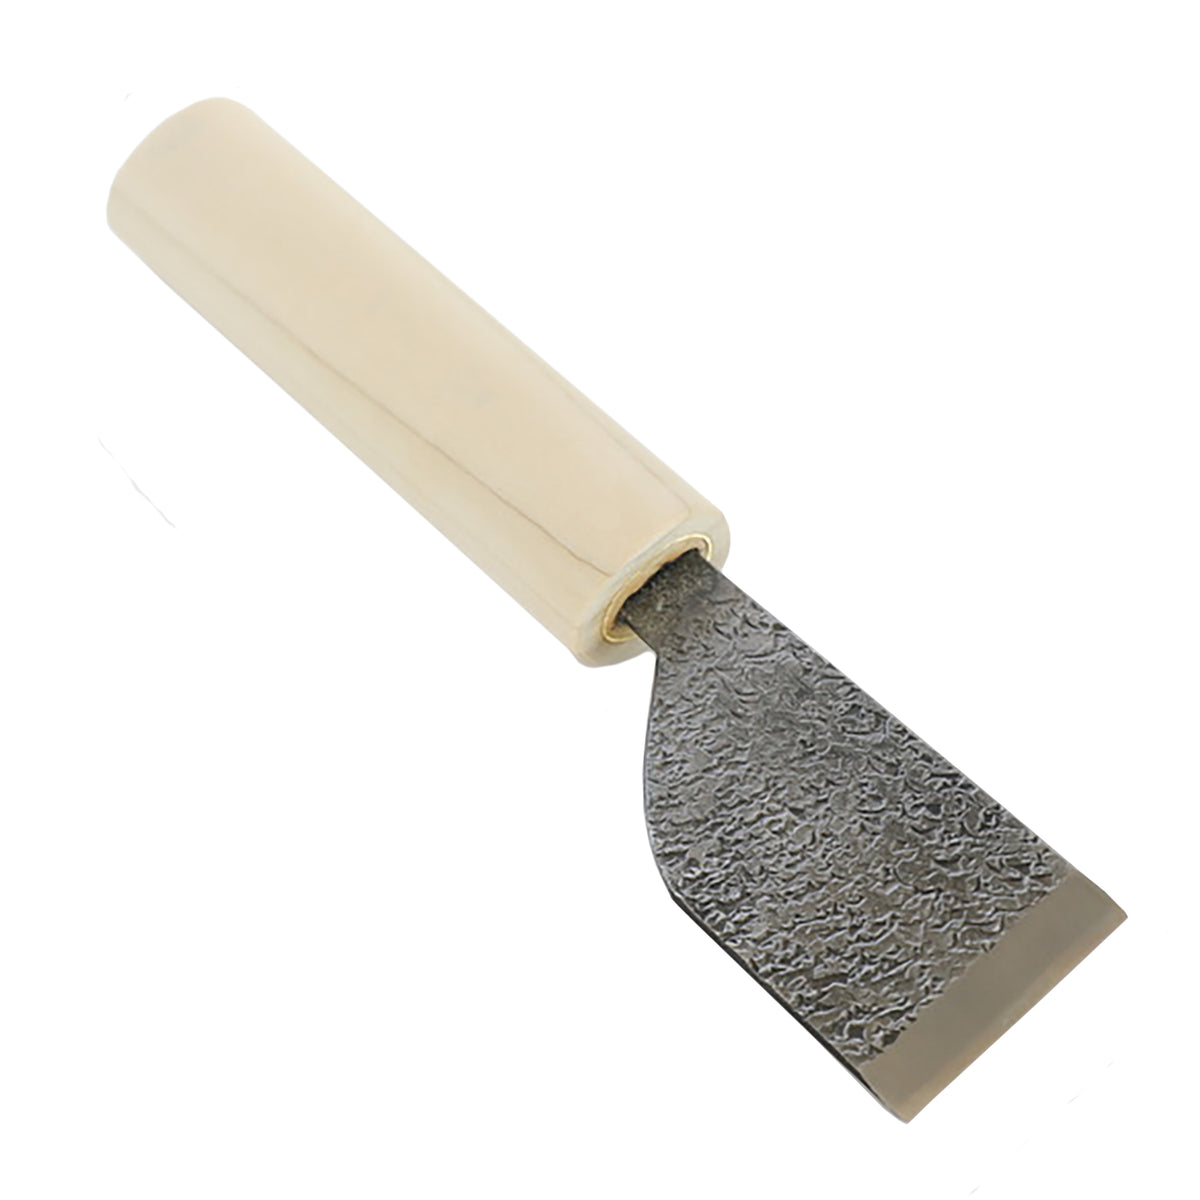 Japanese skiving knife for leather, leather cutting knife, steel